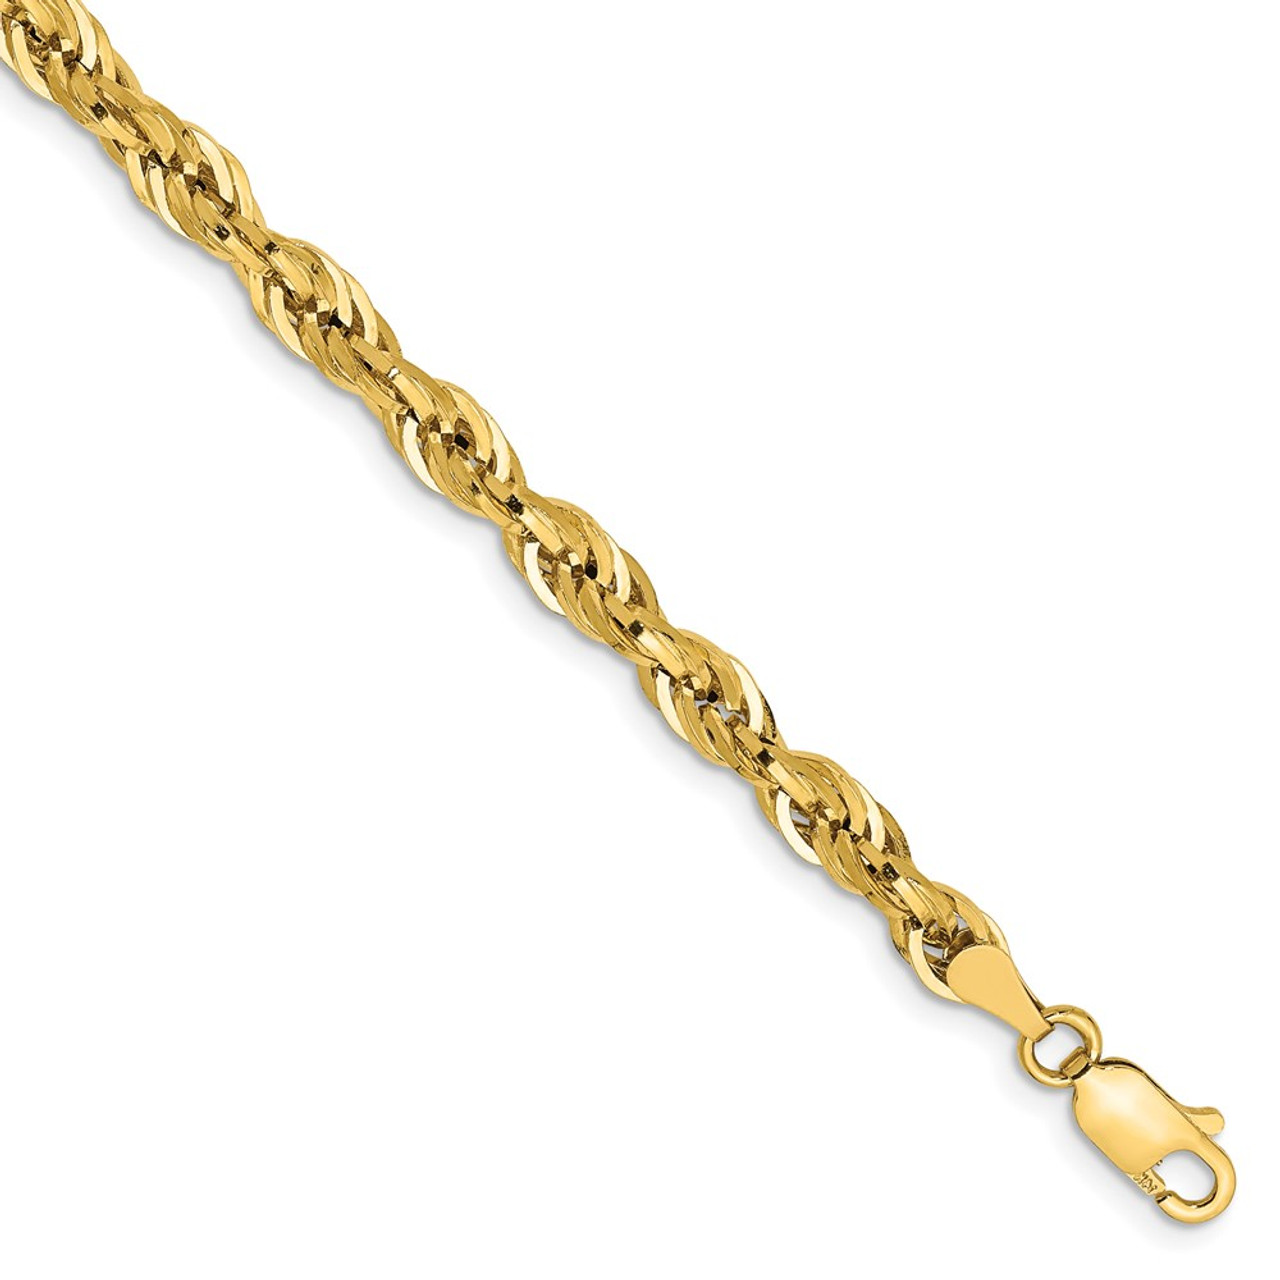 Beautiful 14ky 3.0mm Semi-Solid Rope Chain